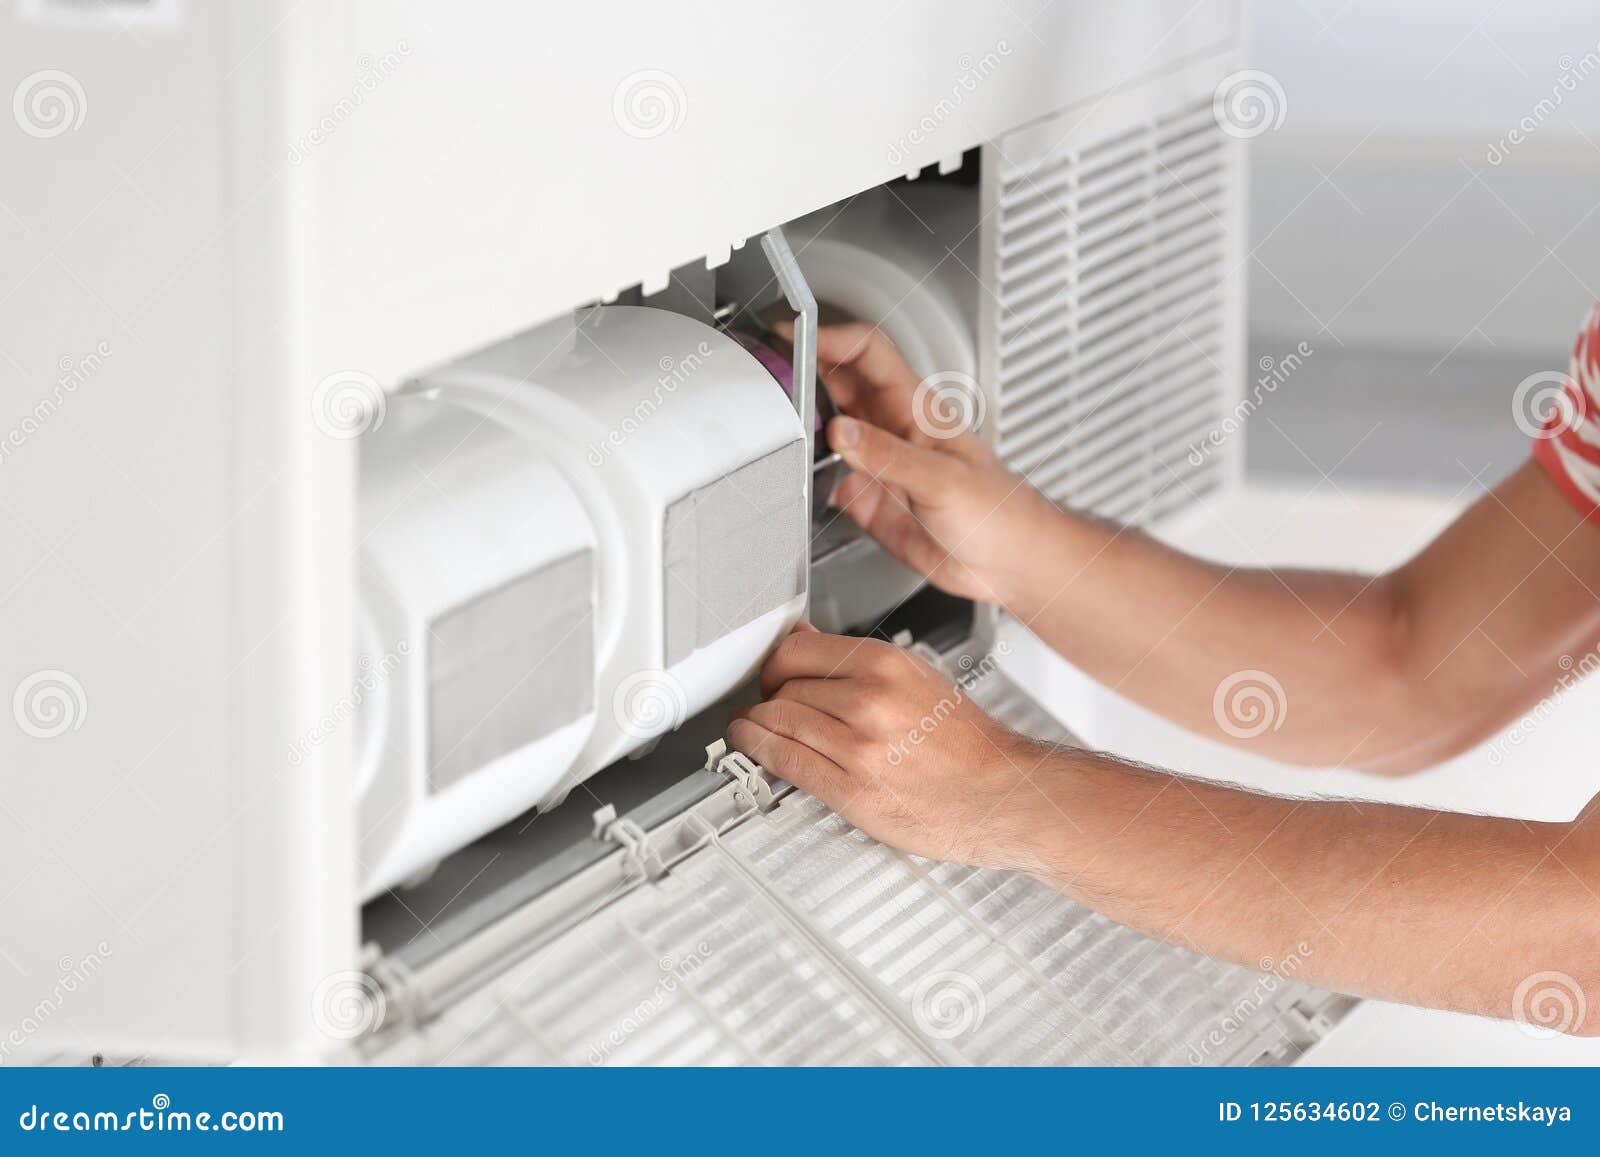 young man fixing air conditioner at home